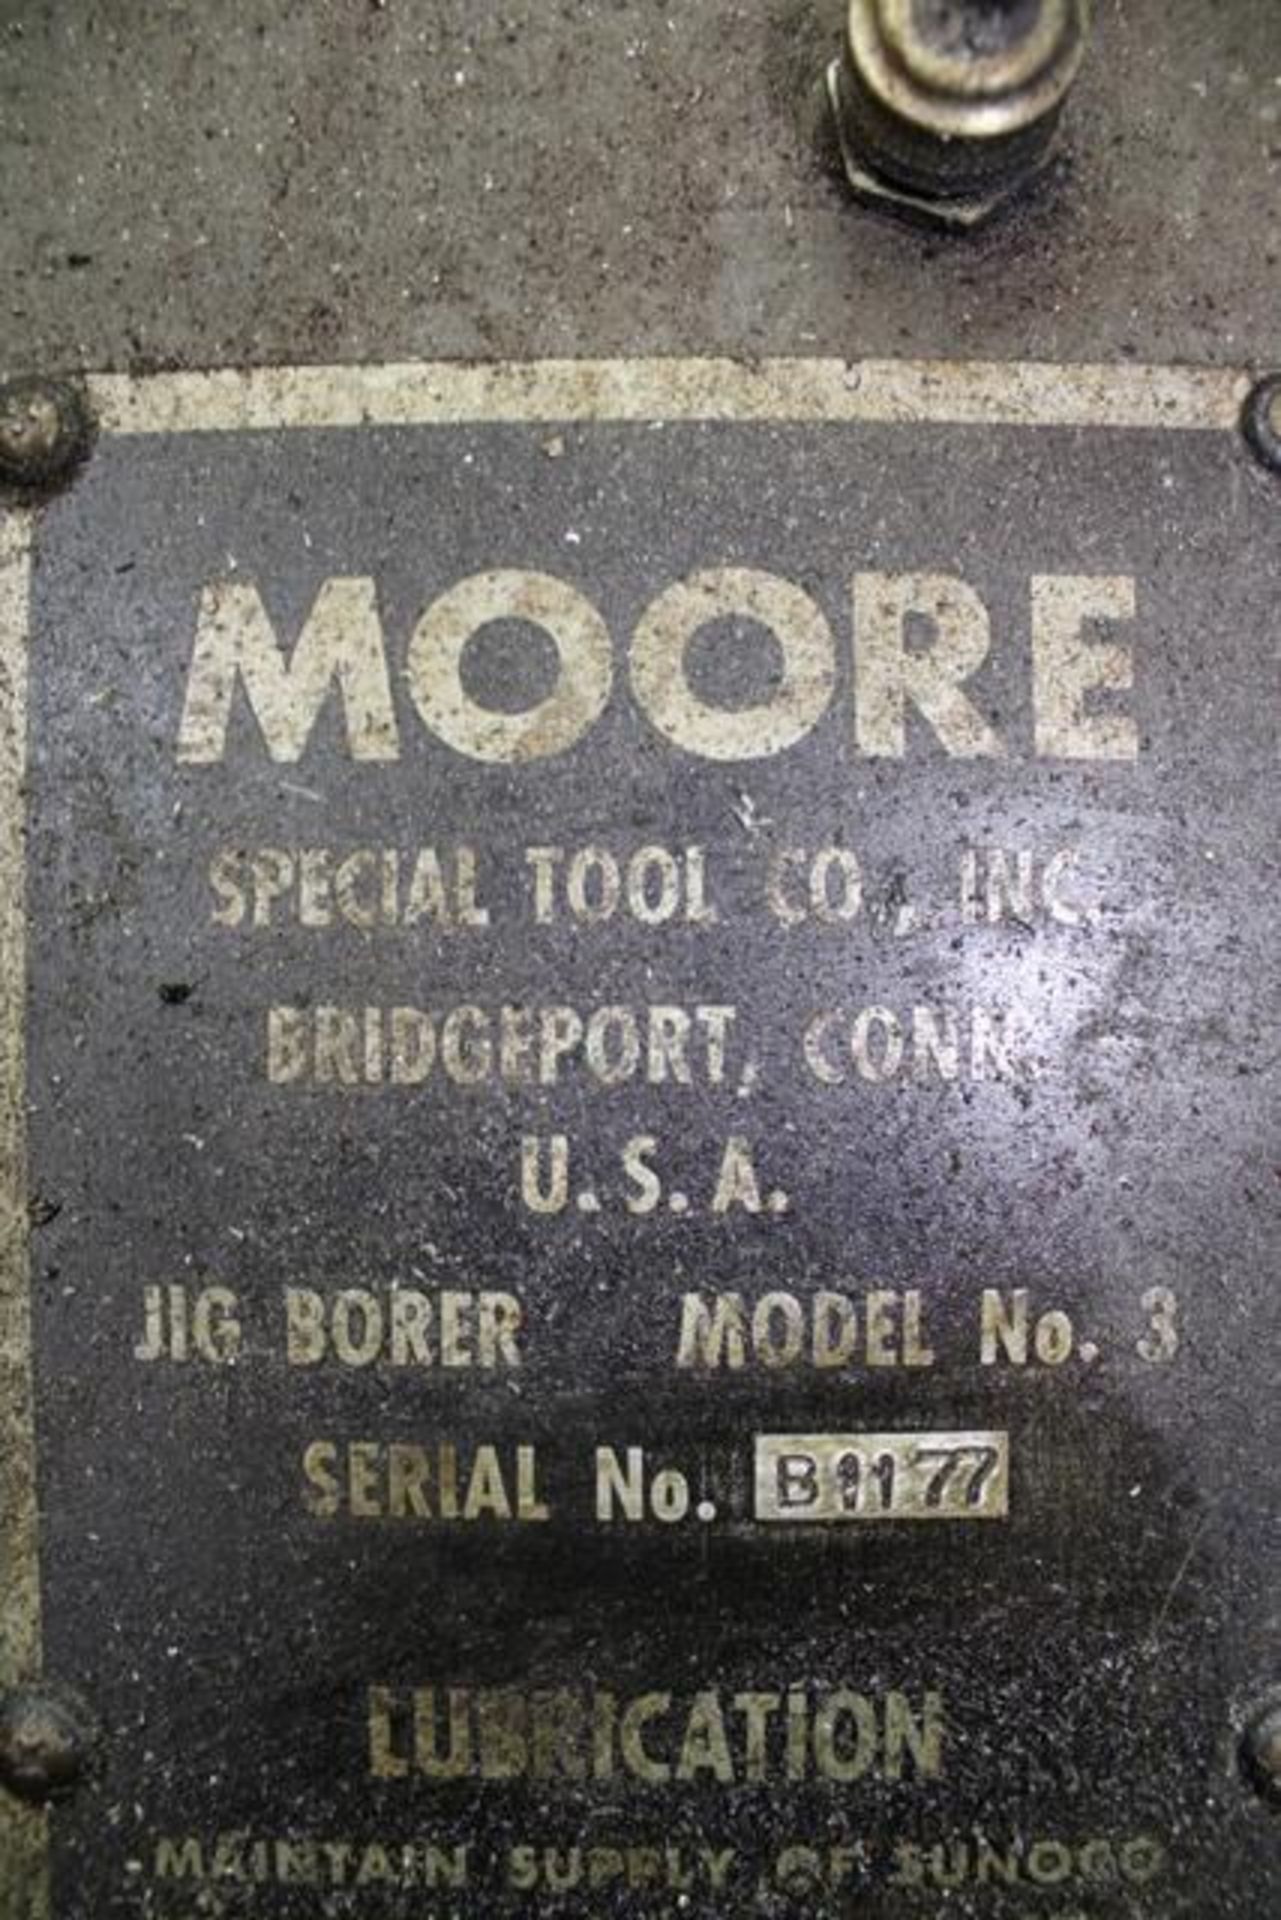 Moore No.3 Jig Borer with 11'' x 24'' Work Table - Image 3 of 3